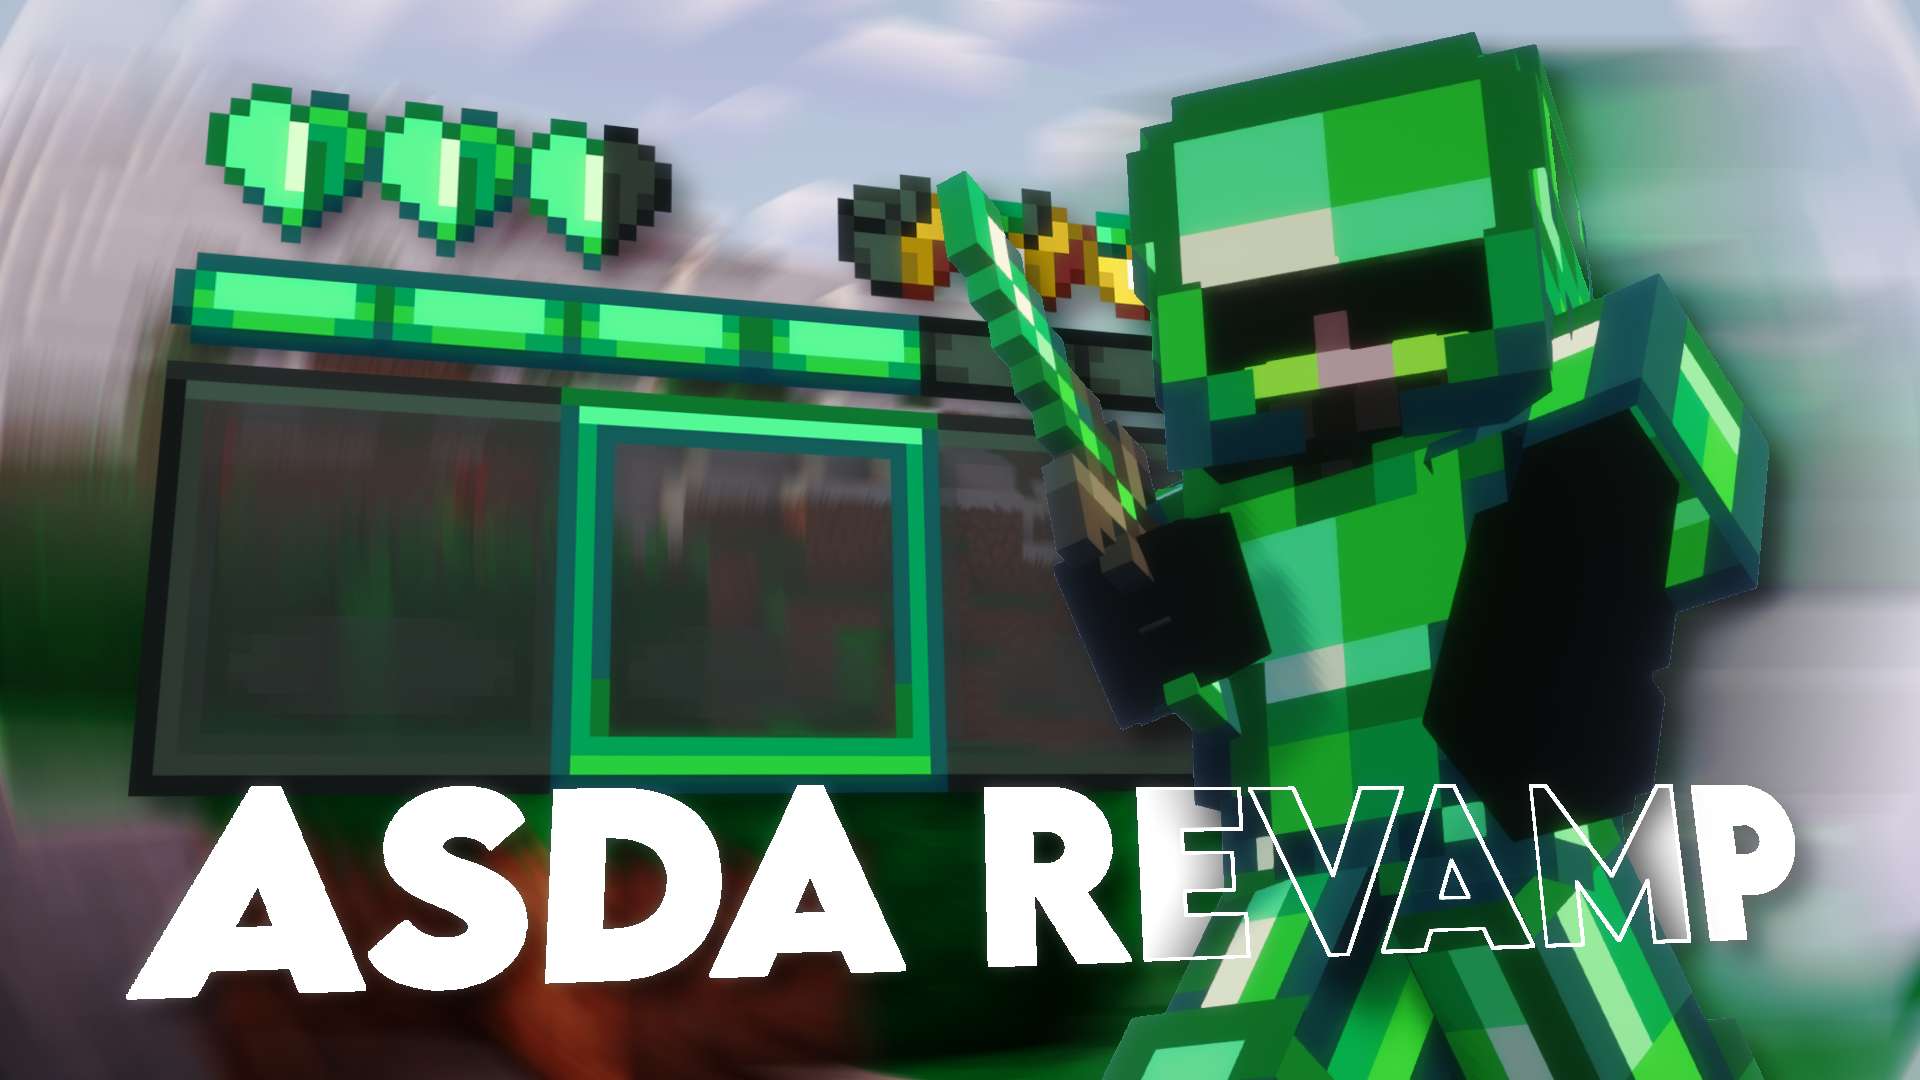 ASDA REVAMP 16x by didms on PvPRP